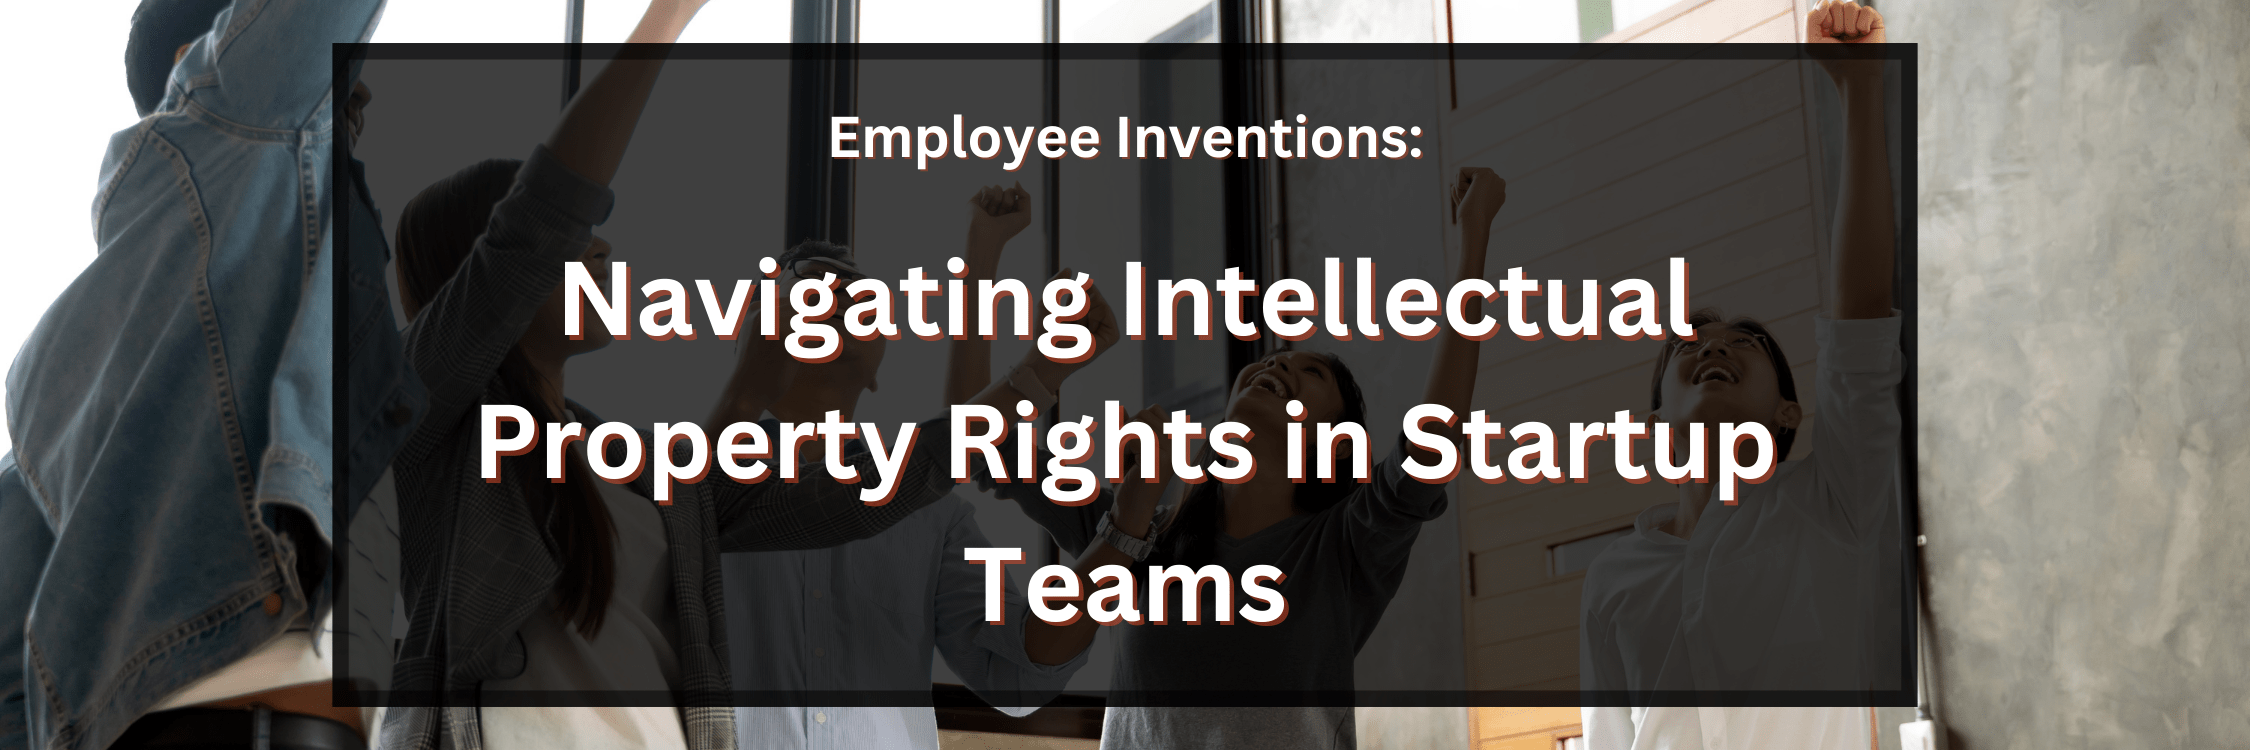 Employee Inventions: Navigating Intellectual Property Rights in Startup Teams